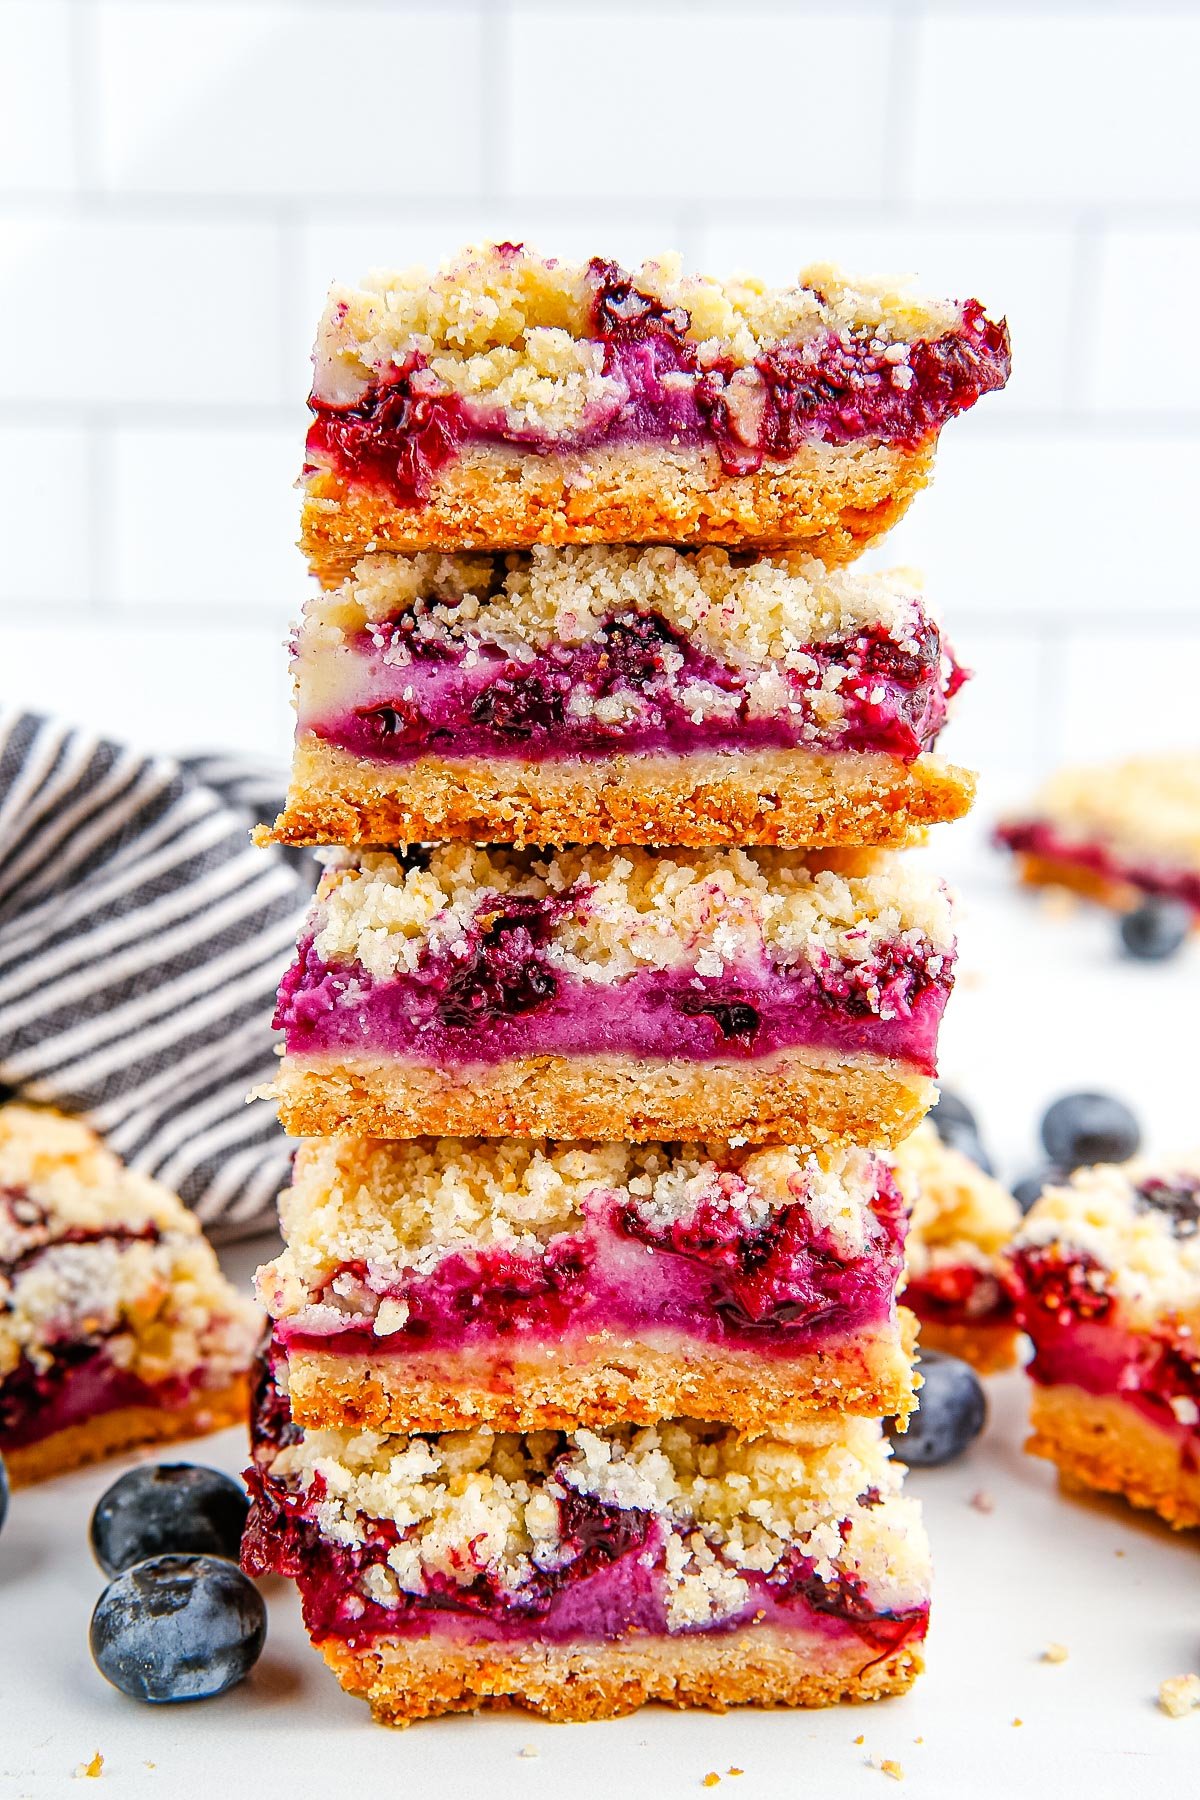 Five Blueberry Crumb Bars stacked on top of each other.